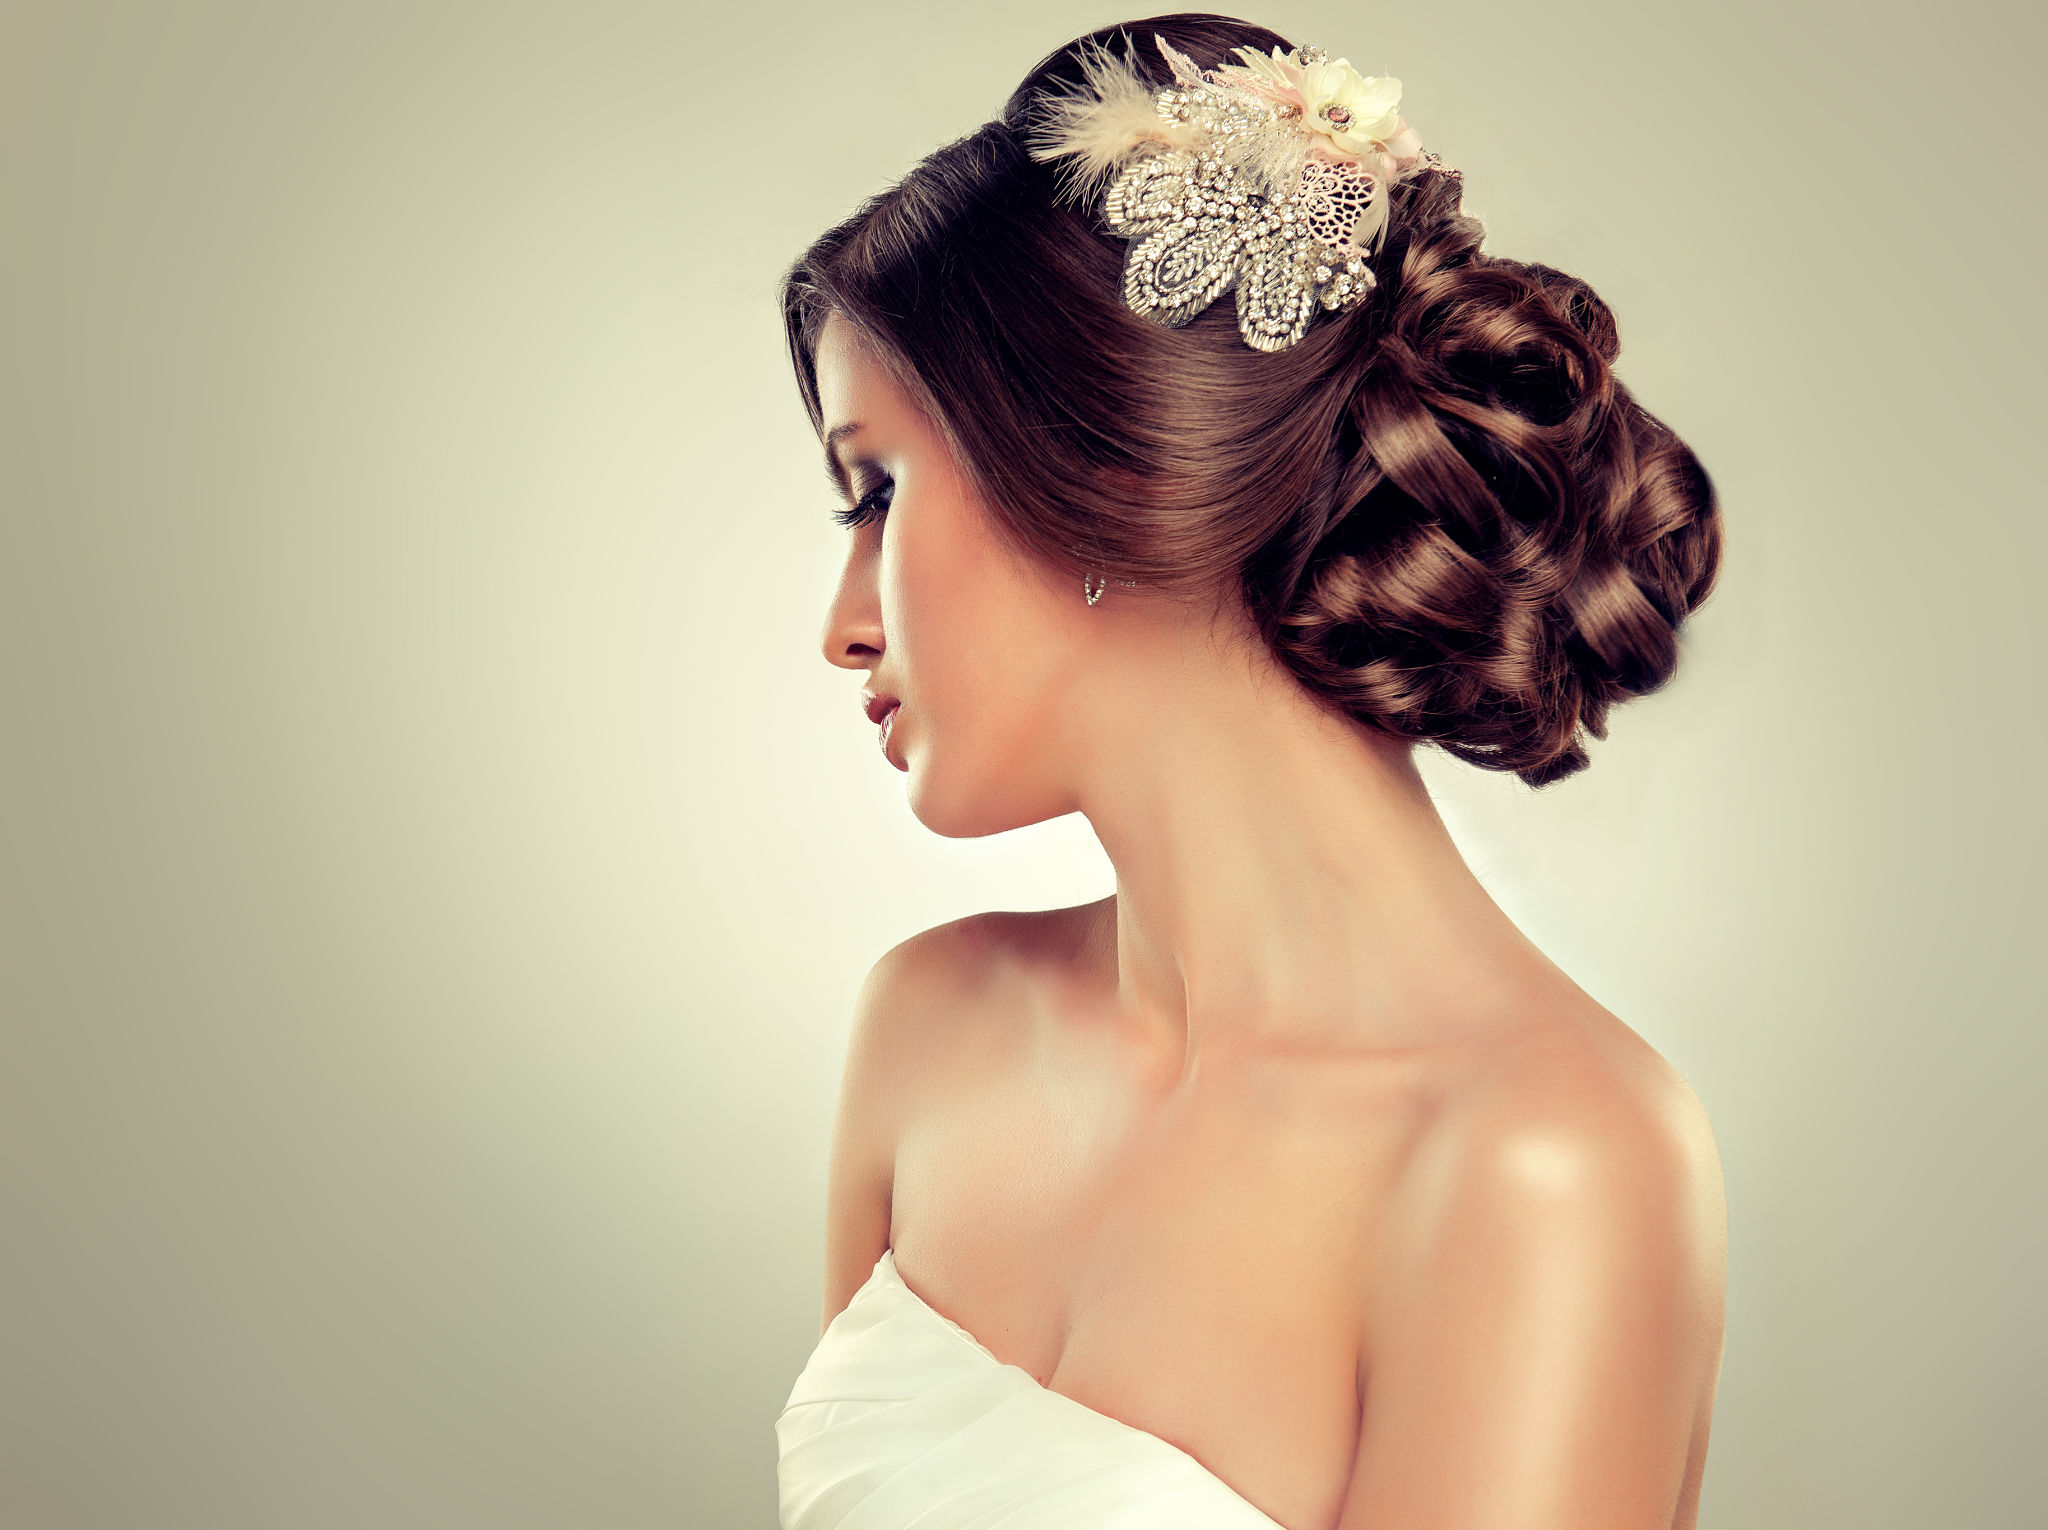 Girl bride  in wedding dress with elegant hairstyle.